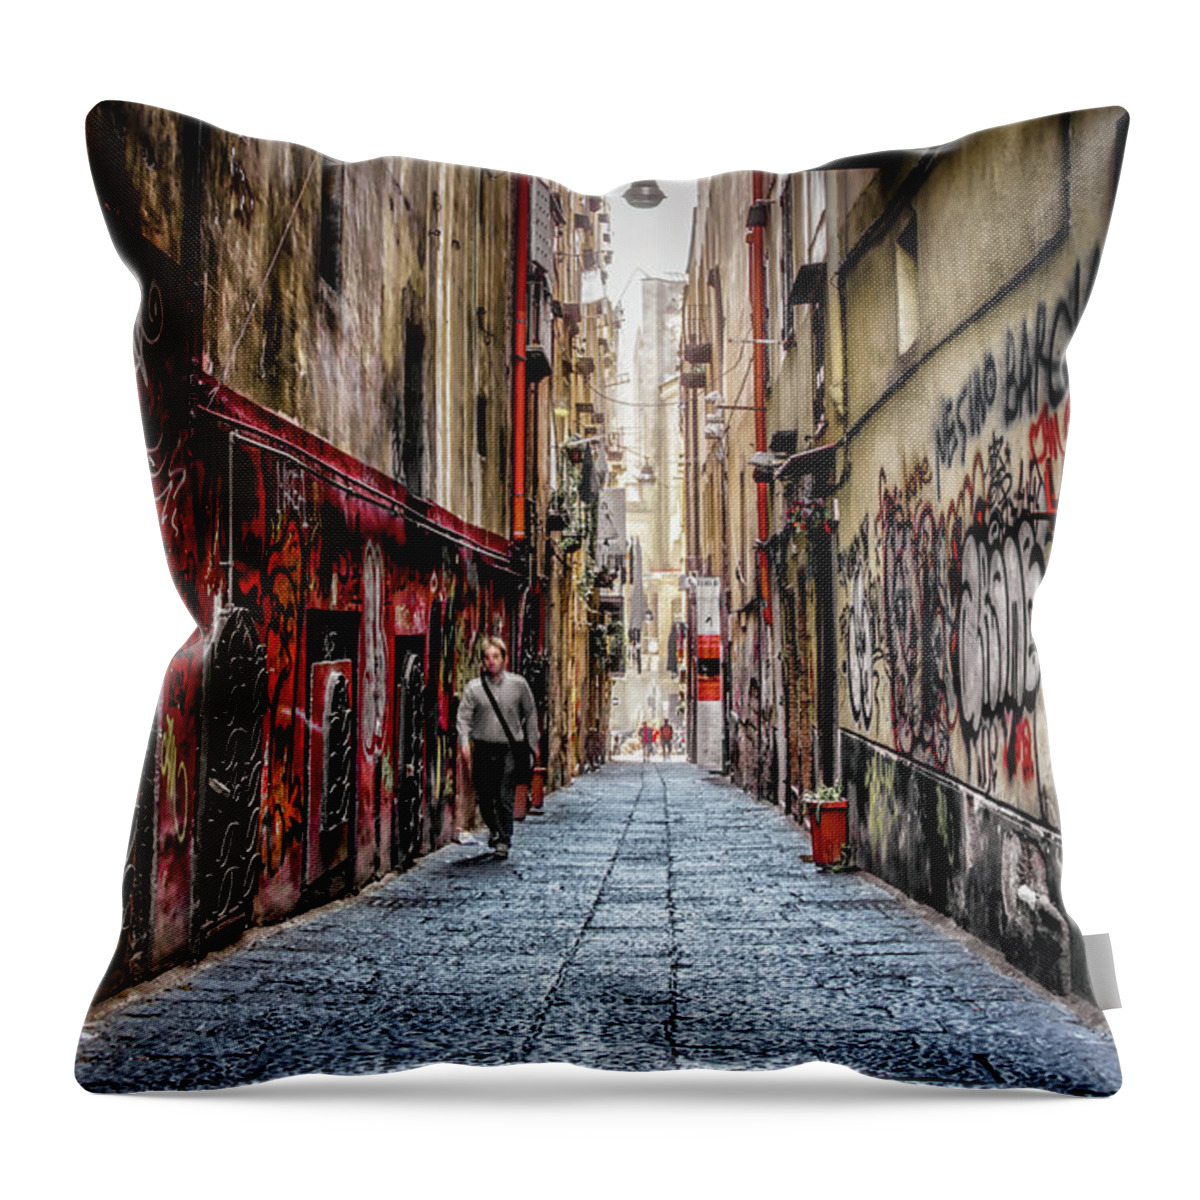 Italy Throw Pillow featuring the photograph Side Street by Bill Chizek